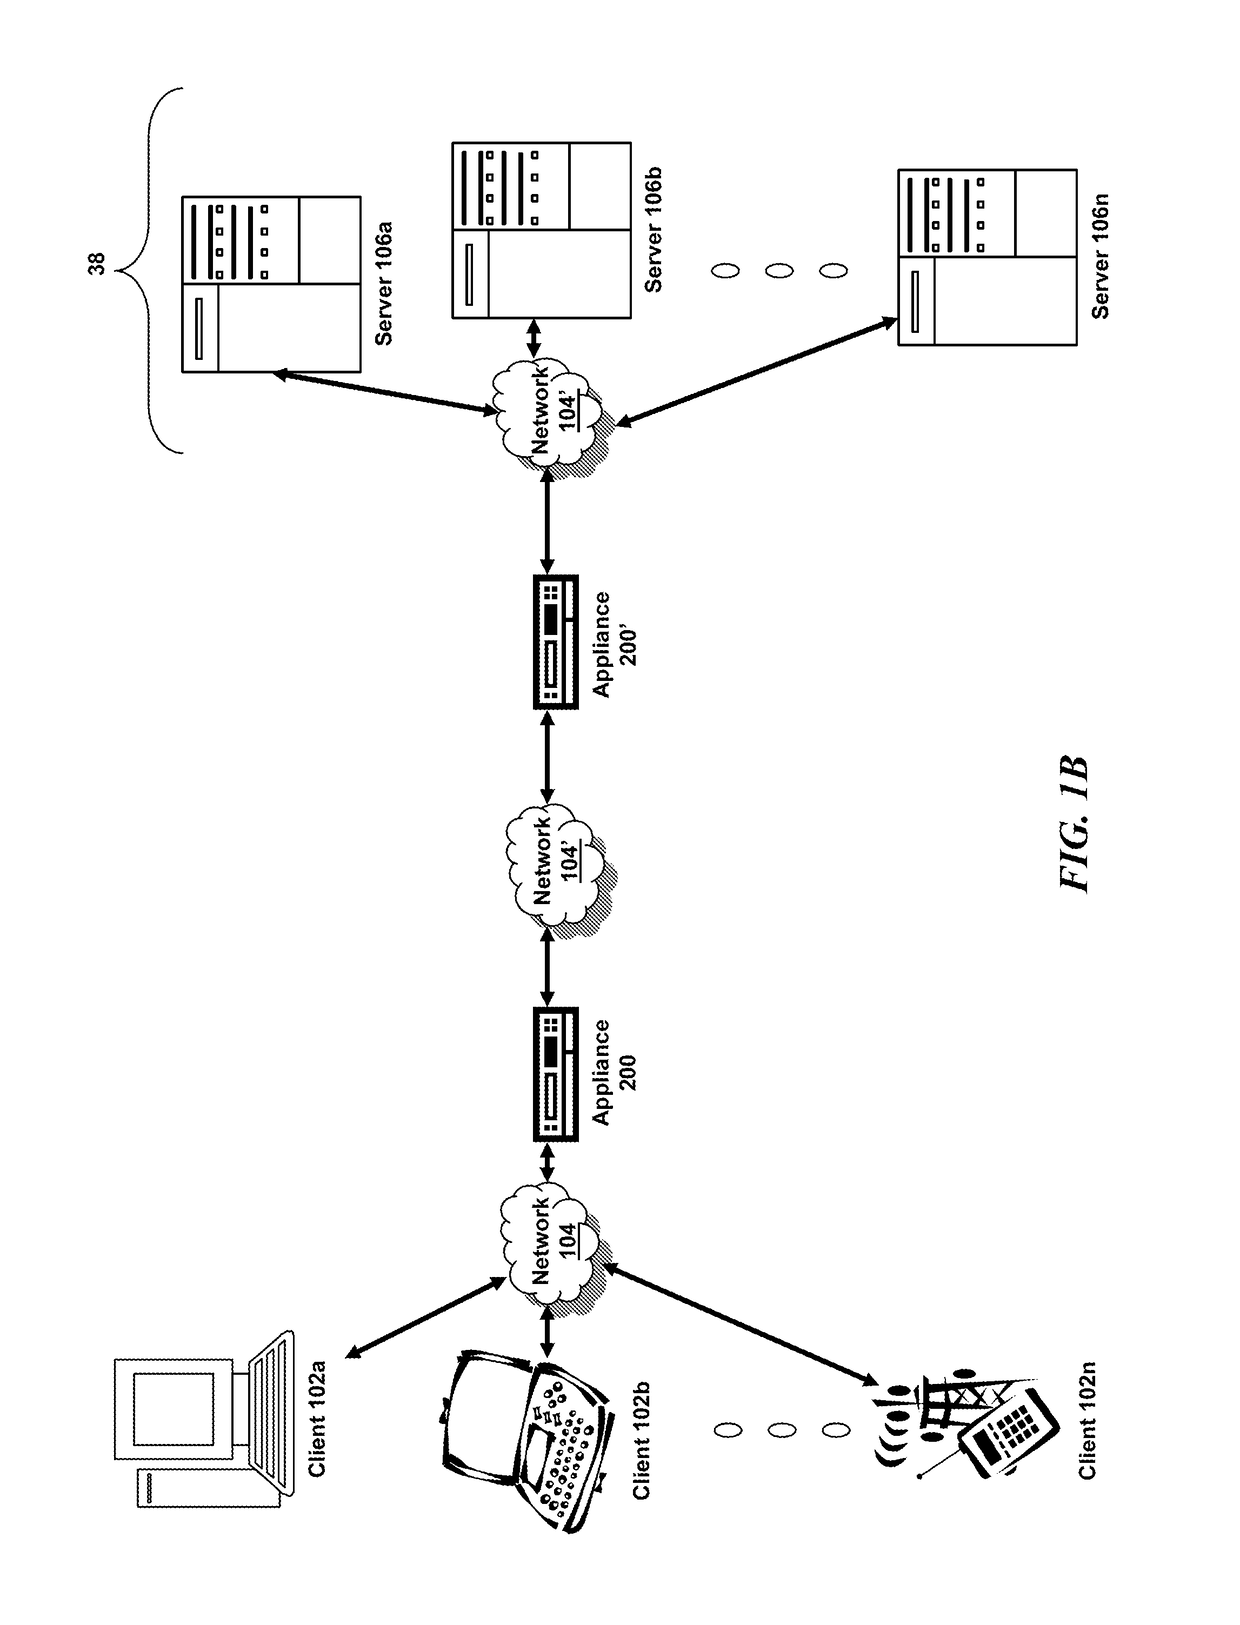 Systems and methods for providing user interfaces for management applications